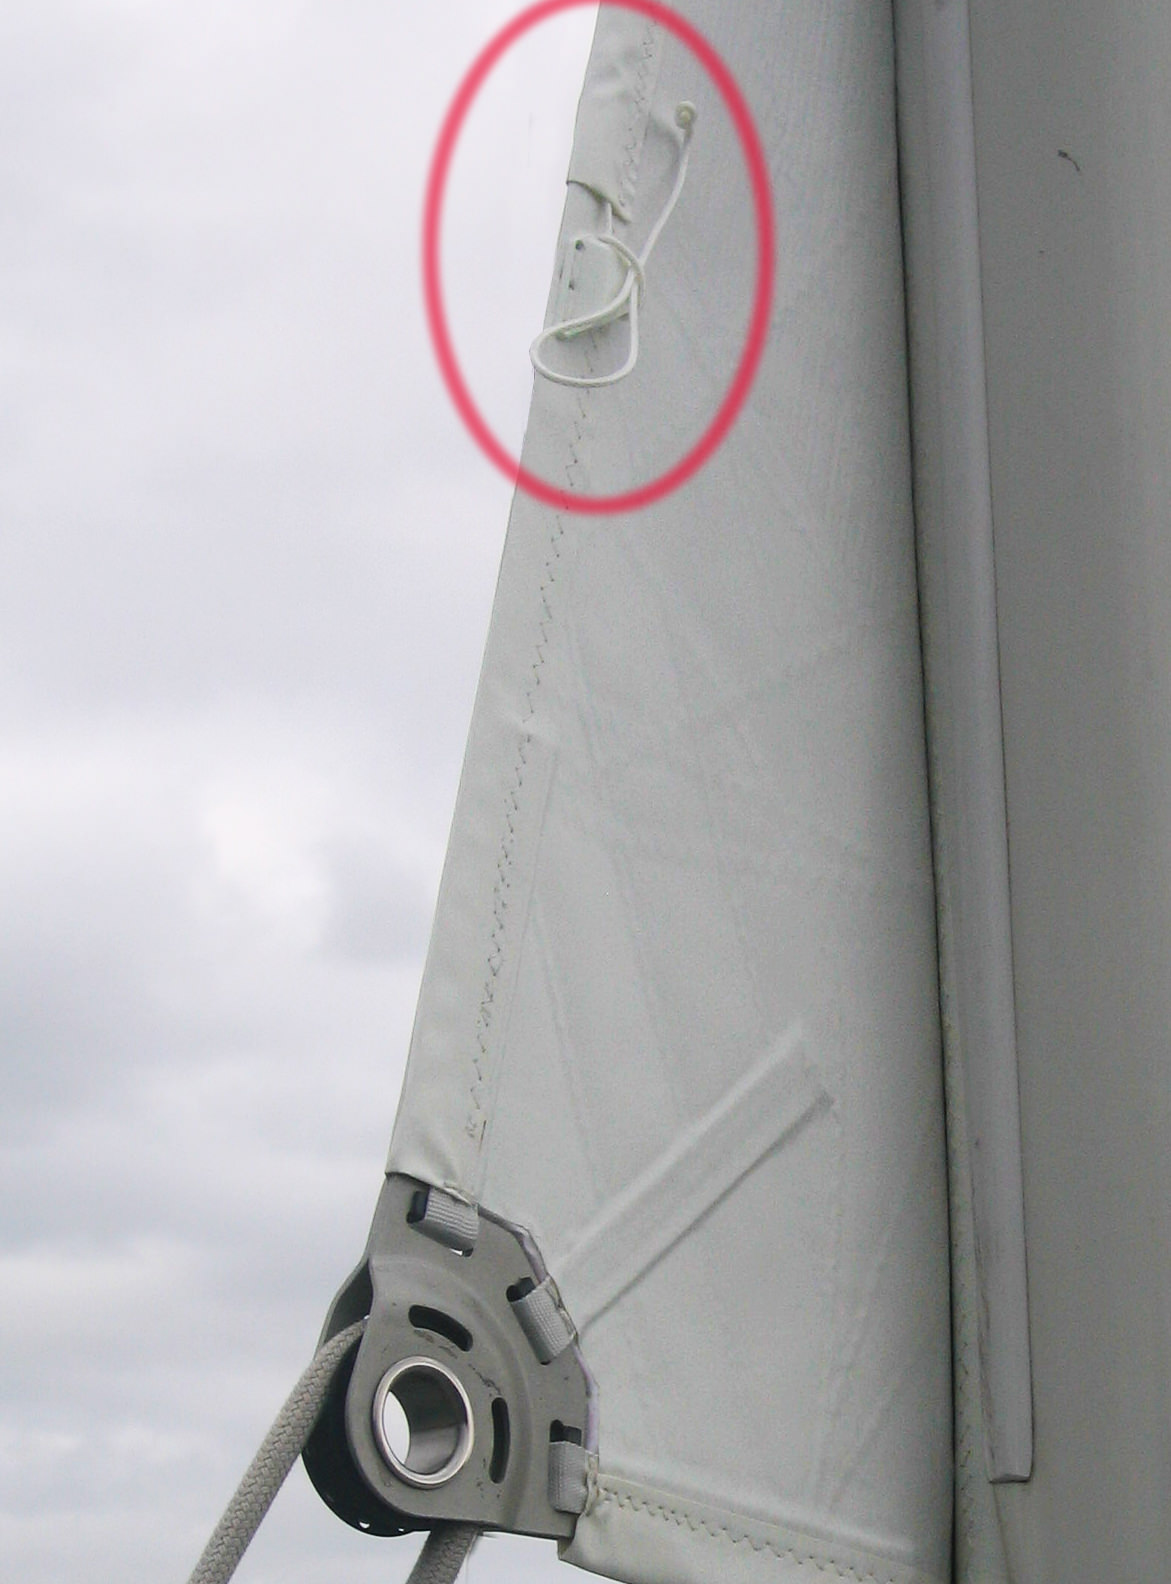 The standard location for a leech line cleat is just above the clew of a mainsail.